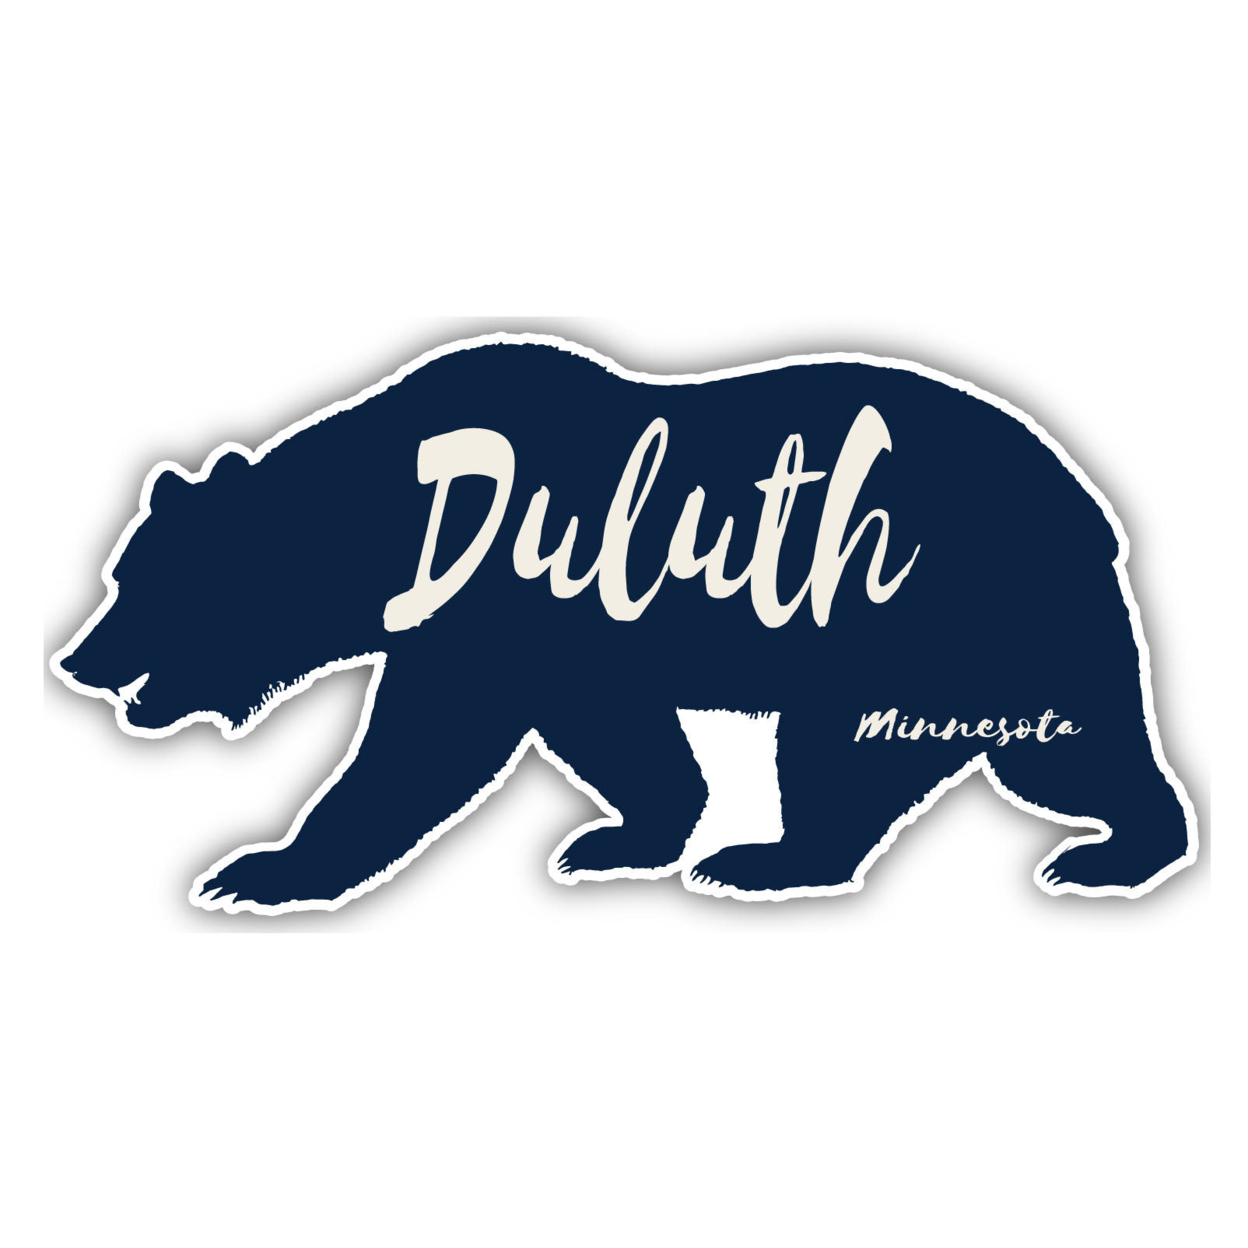 Duluth Minnesota Souvenir Decorative Stickers (Choose Theme And Size) - 4-Pack, 4-Inch, Bear